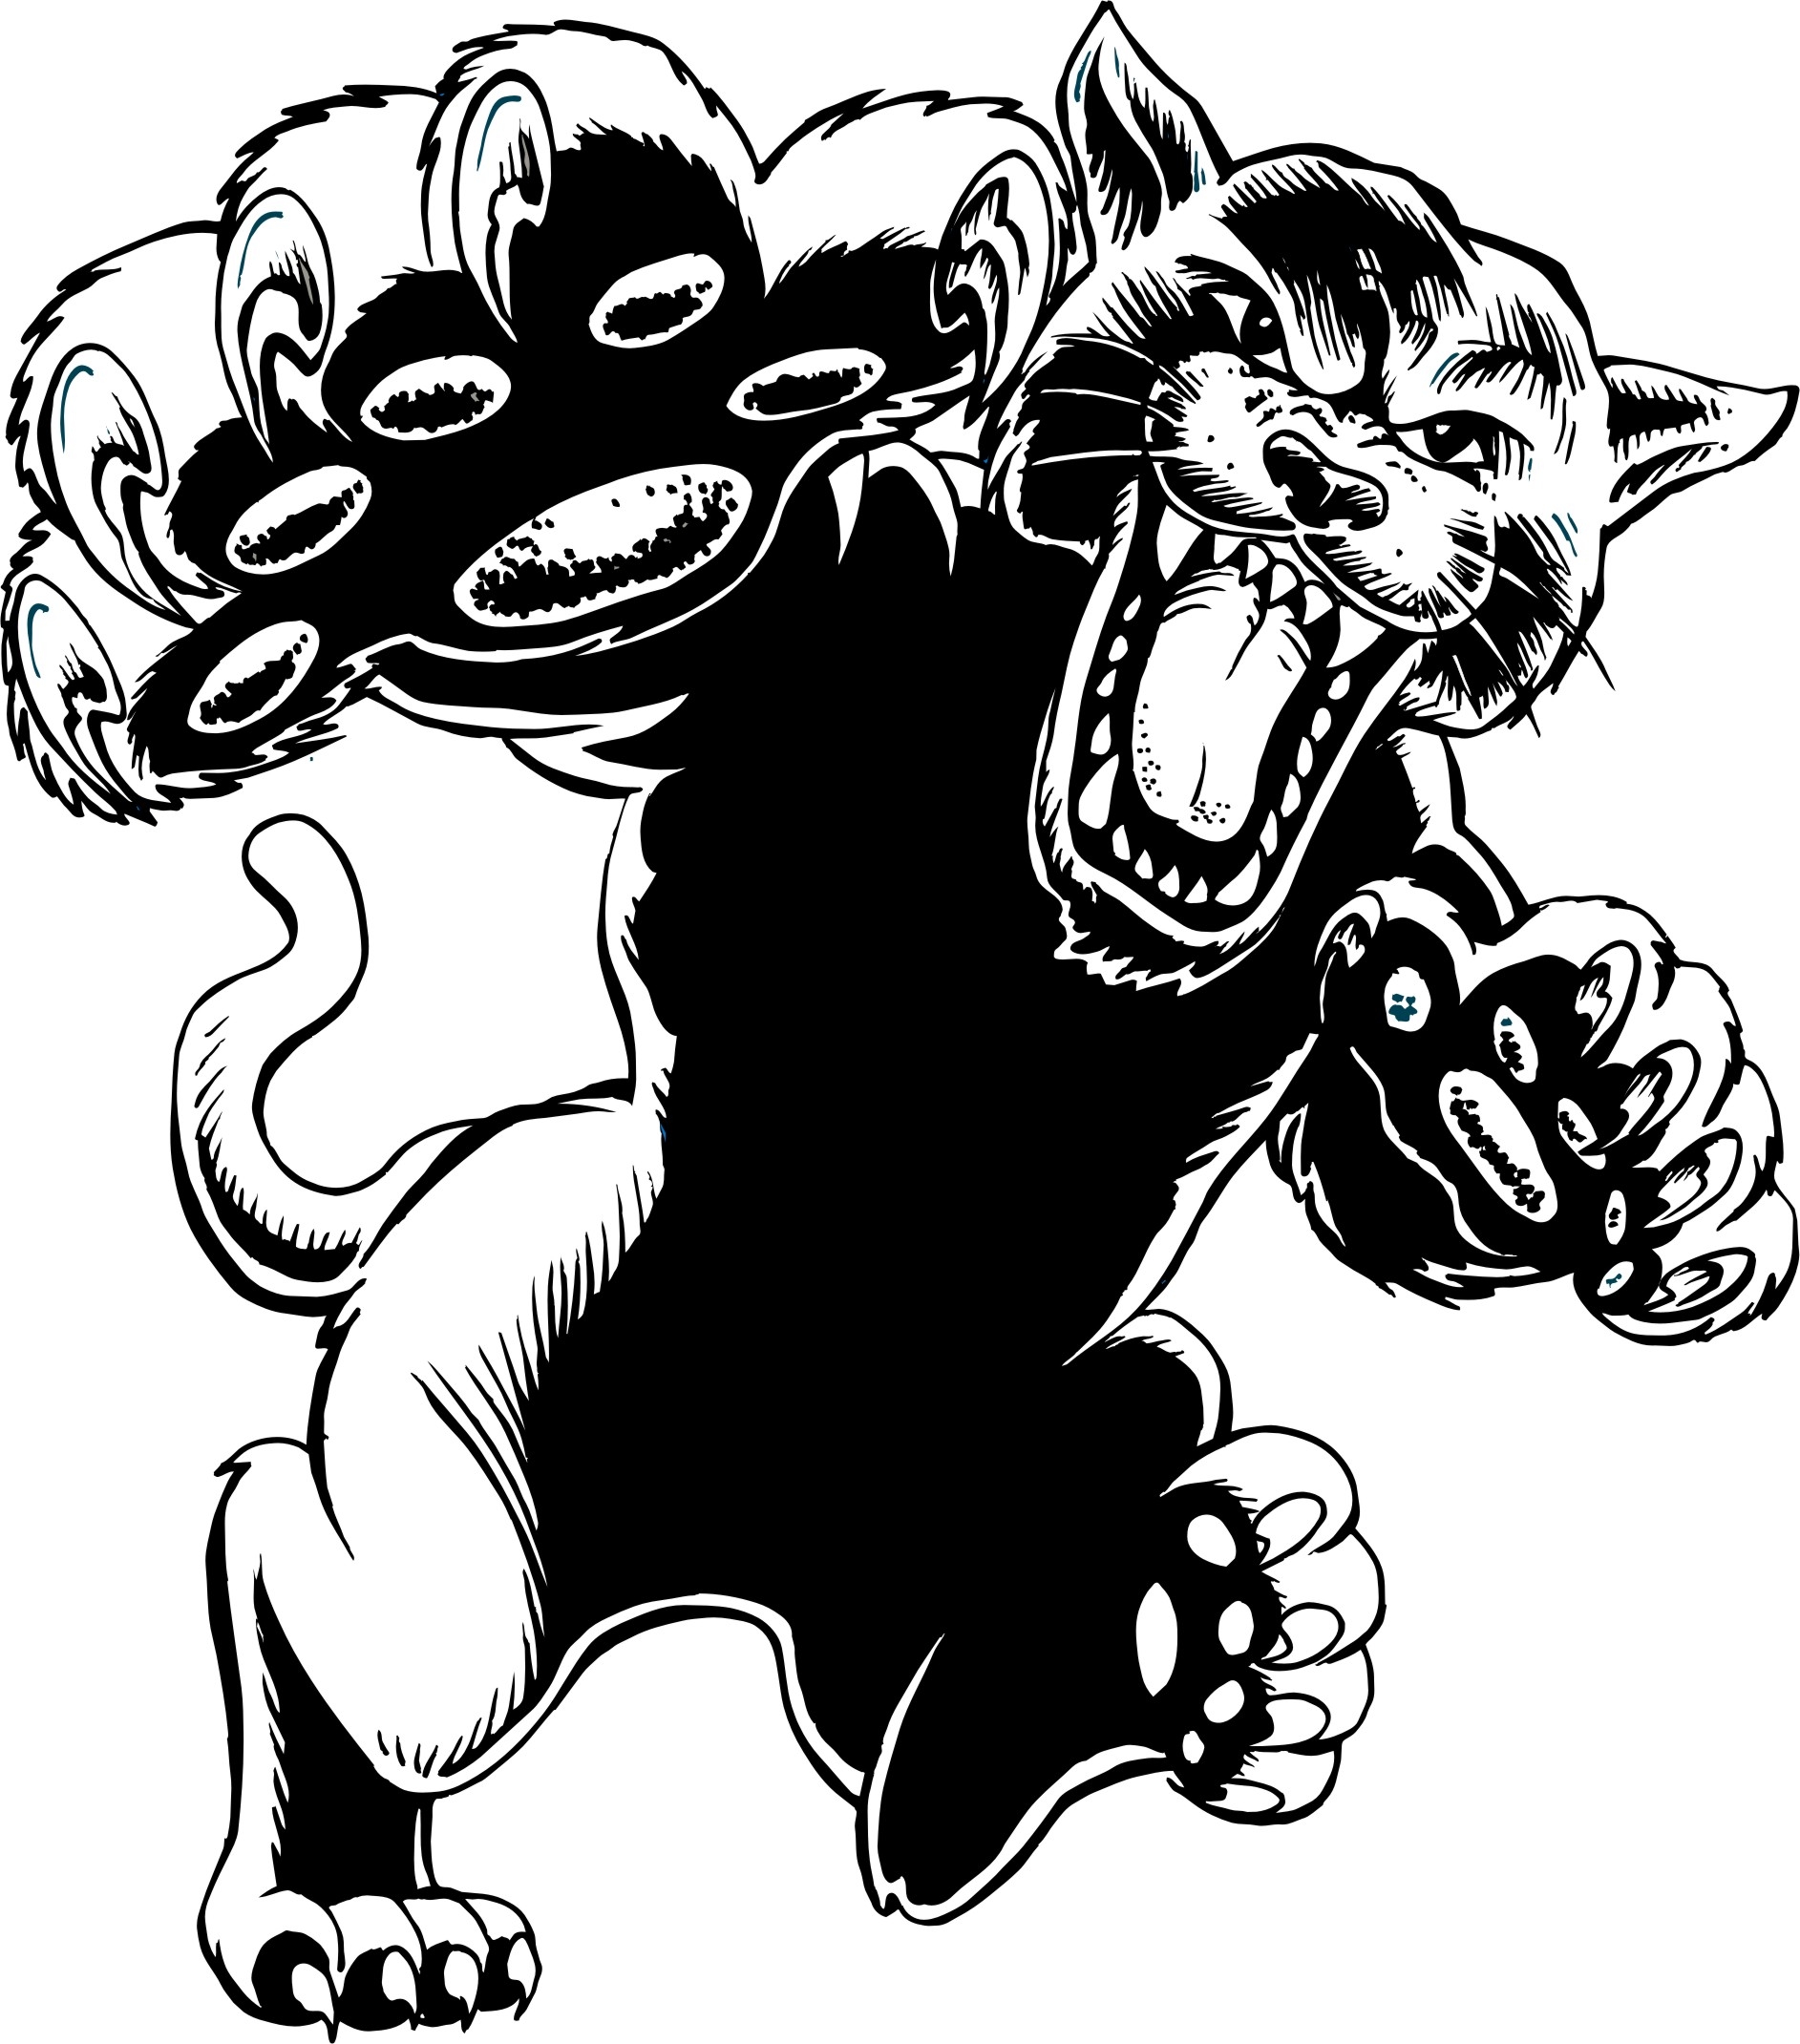 Panther clipart #2, Download drawings